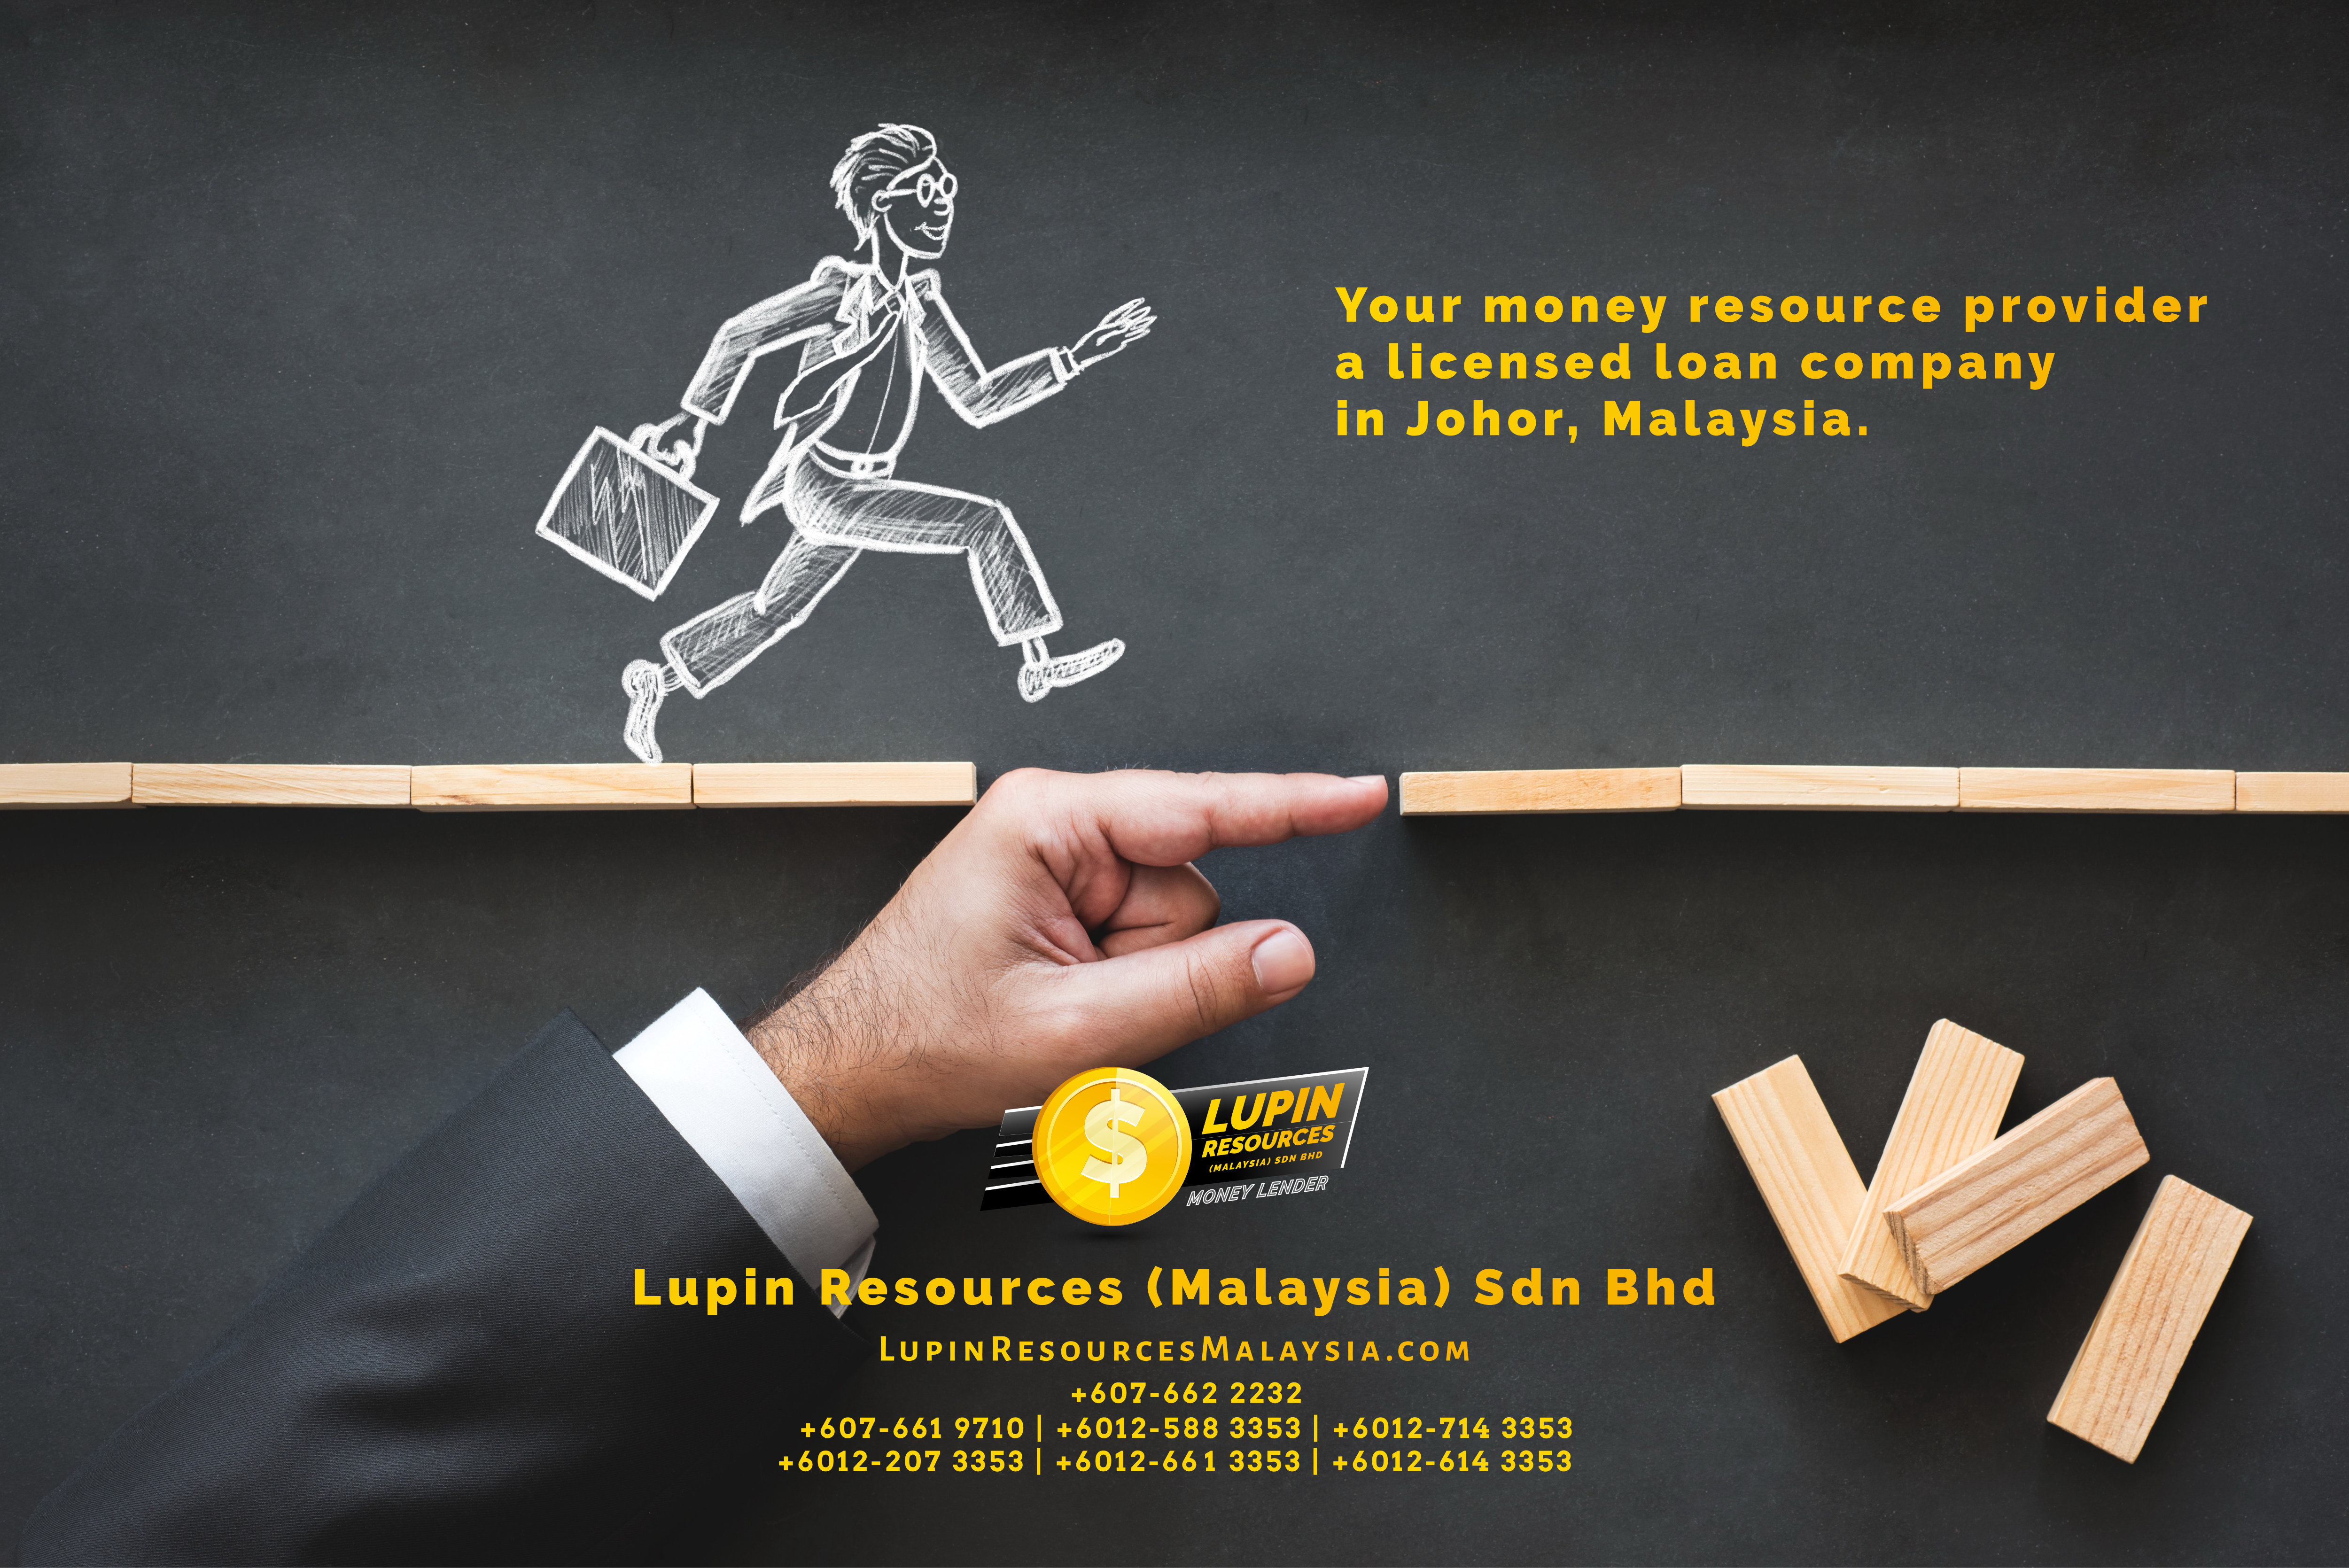 Johor Licensed Loan Company Licensed Money Lender Lupin Resources Malaysia SDN BHD Your money resource provider Kulai Johor Bahru Johor Malaysia Business Loan A01-11